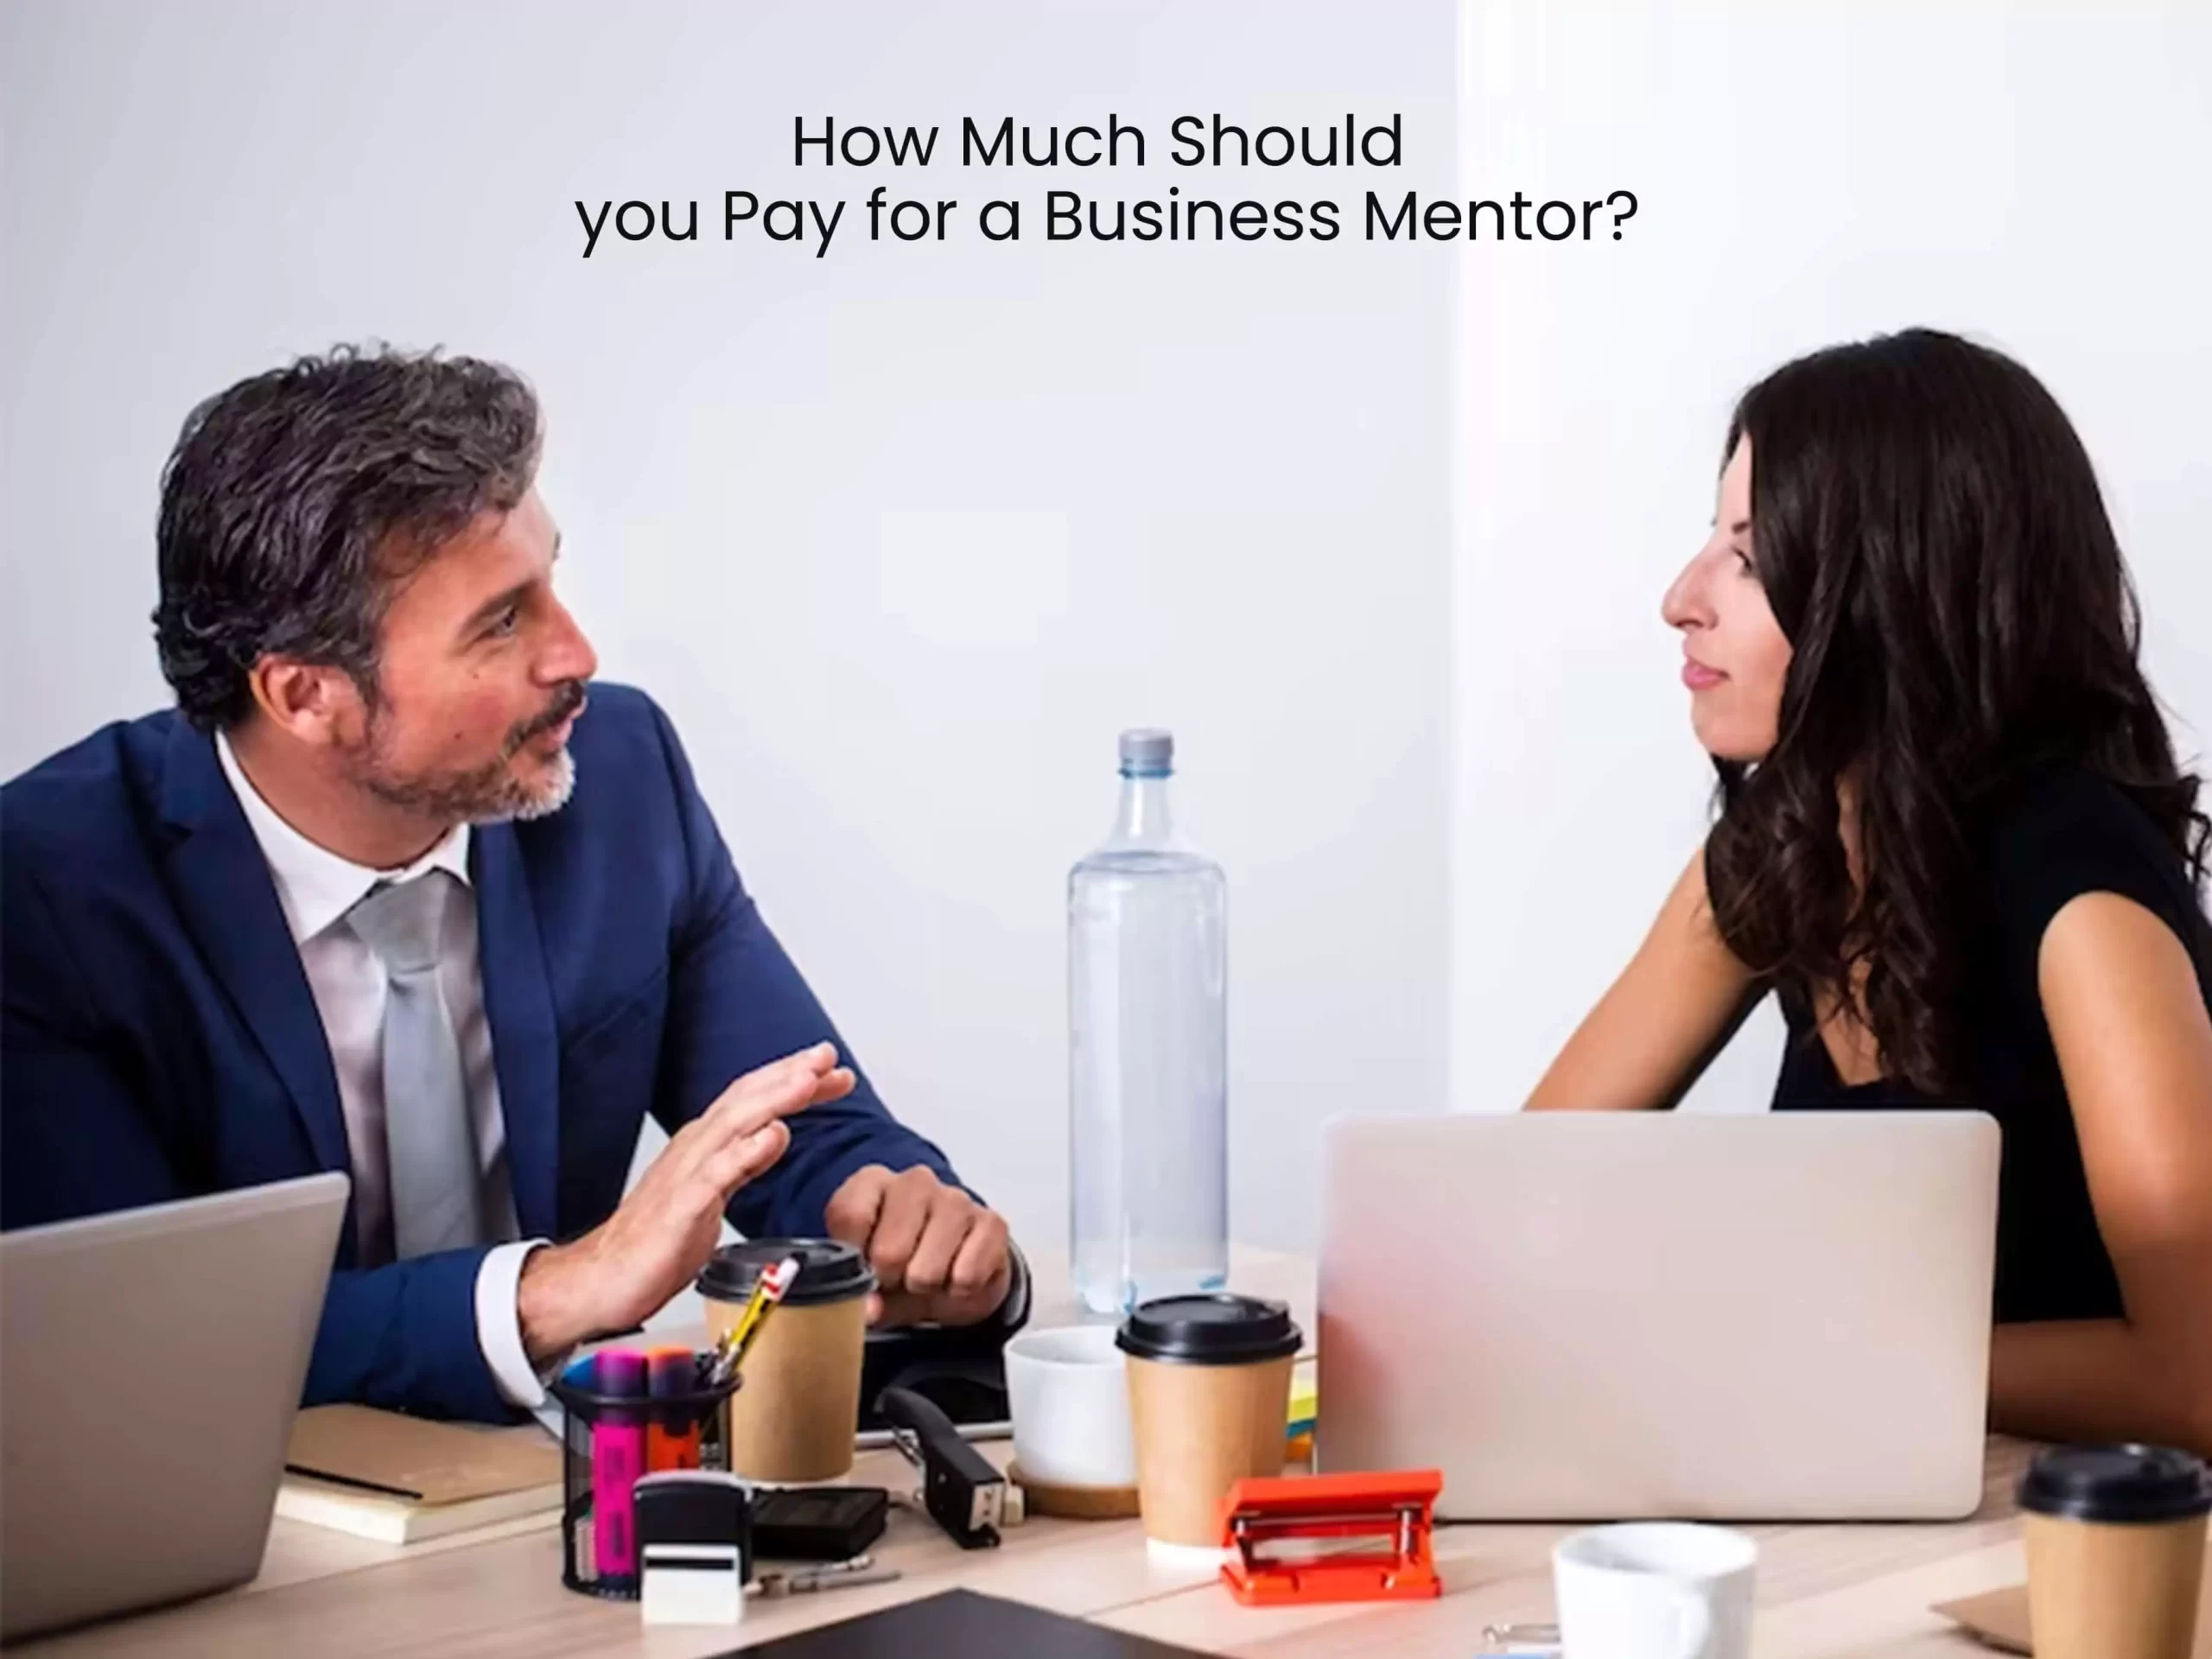 How much should you pay for a business mentor?